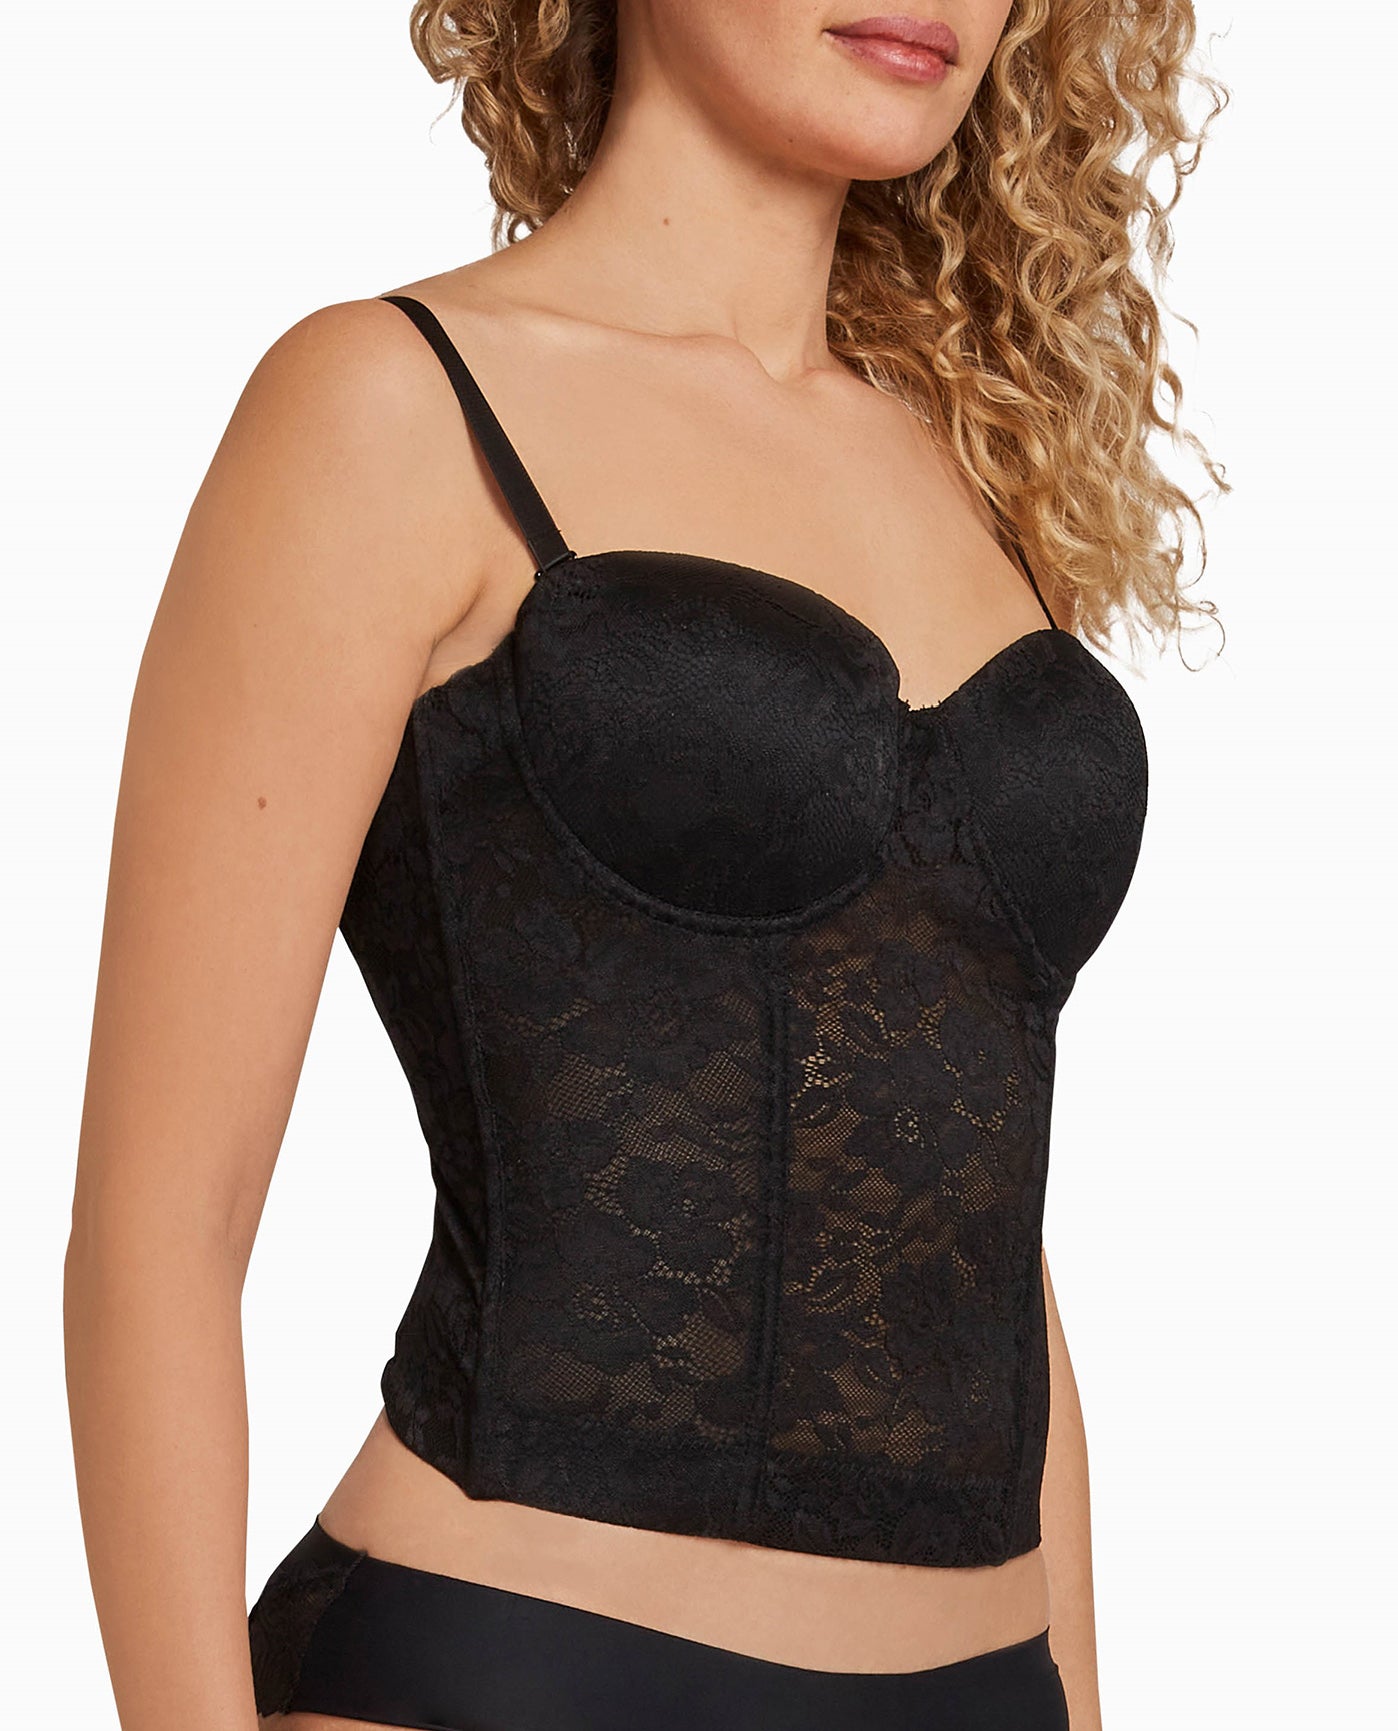 SIDE OF LACE POWER MESH BUSTIER | Black